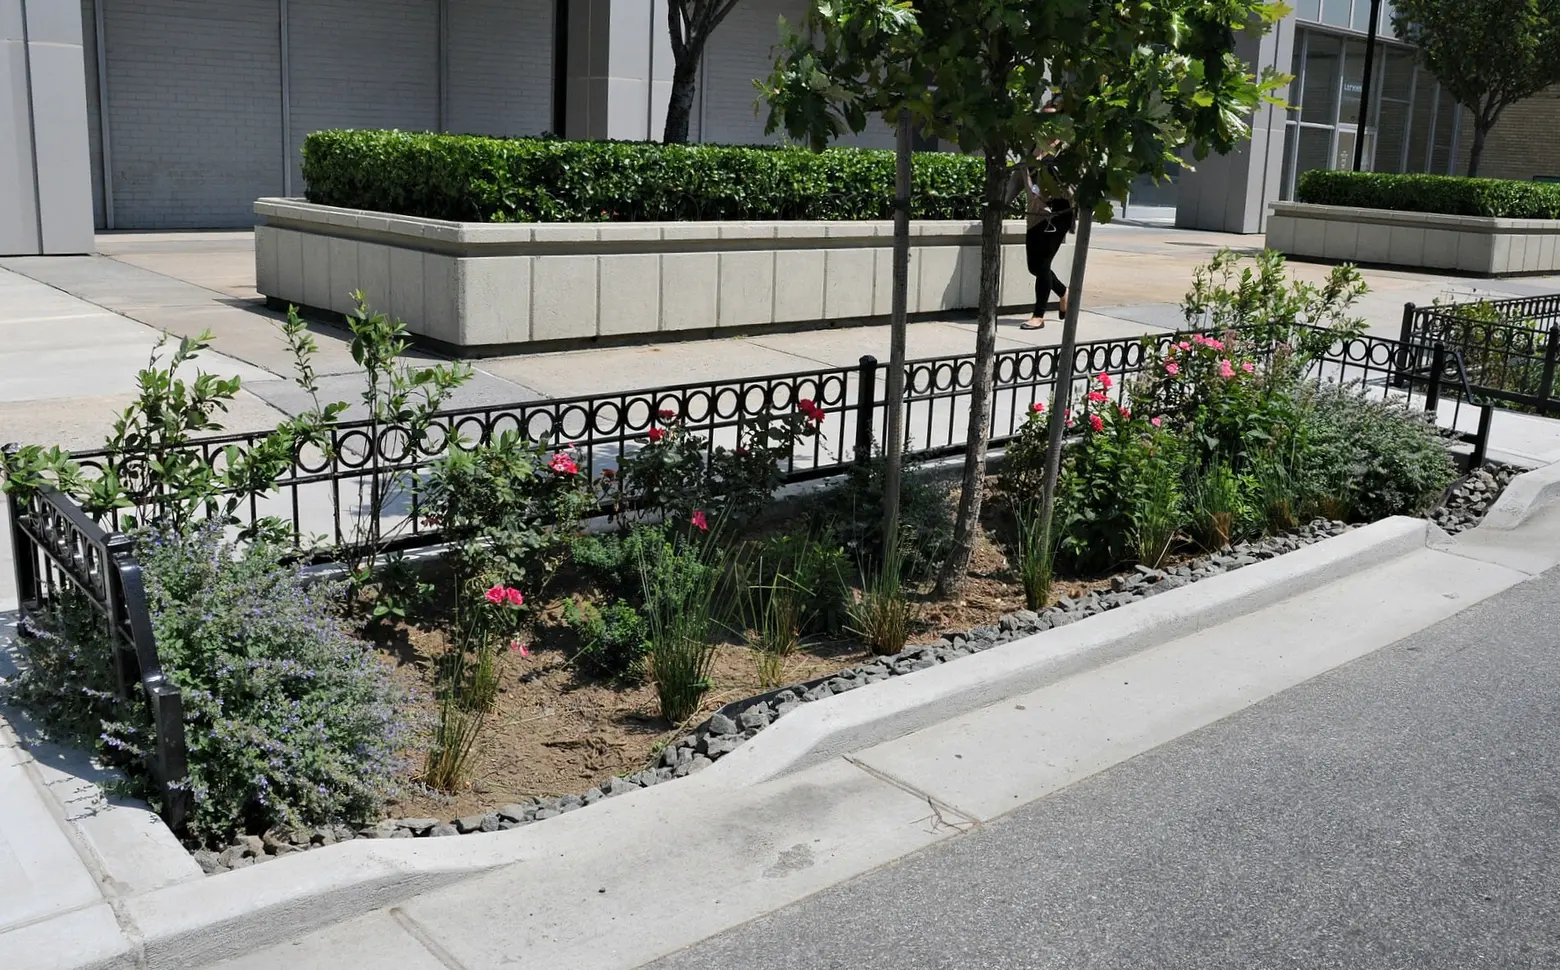 2,000 More Bioswales Will Help NYC Absorb Stormwater